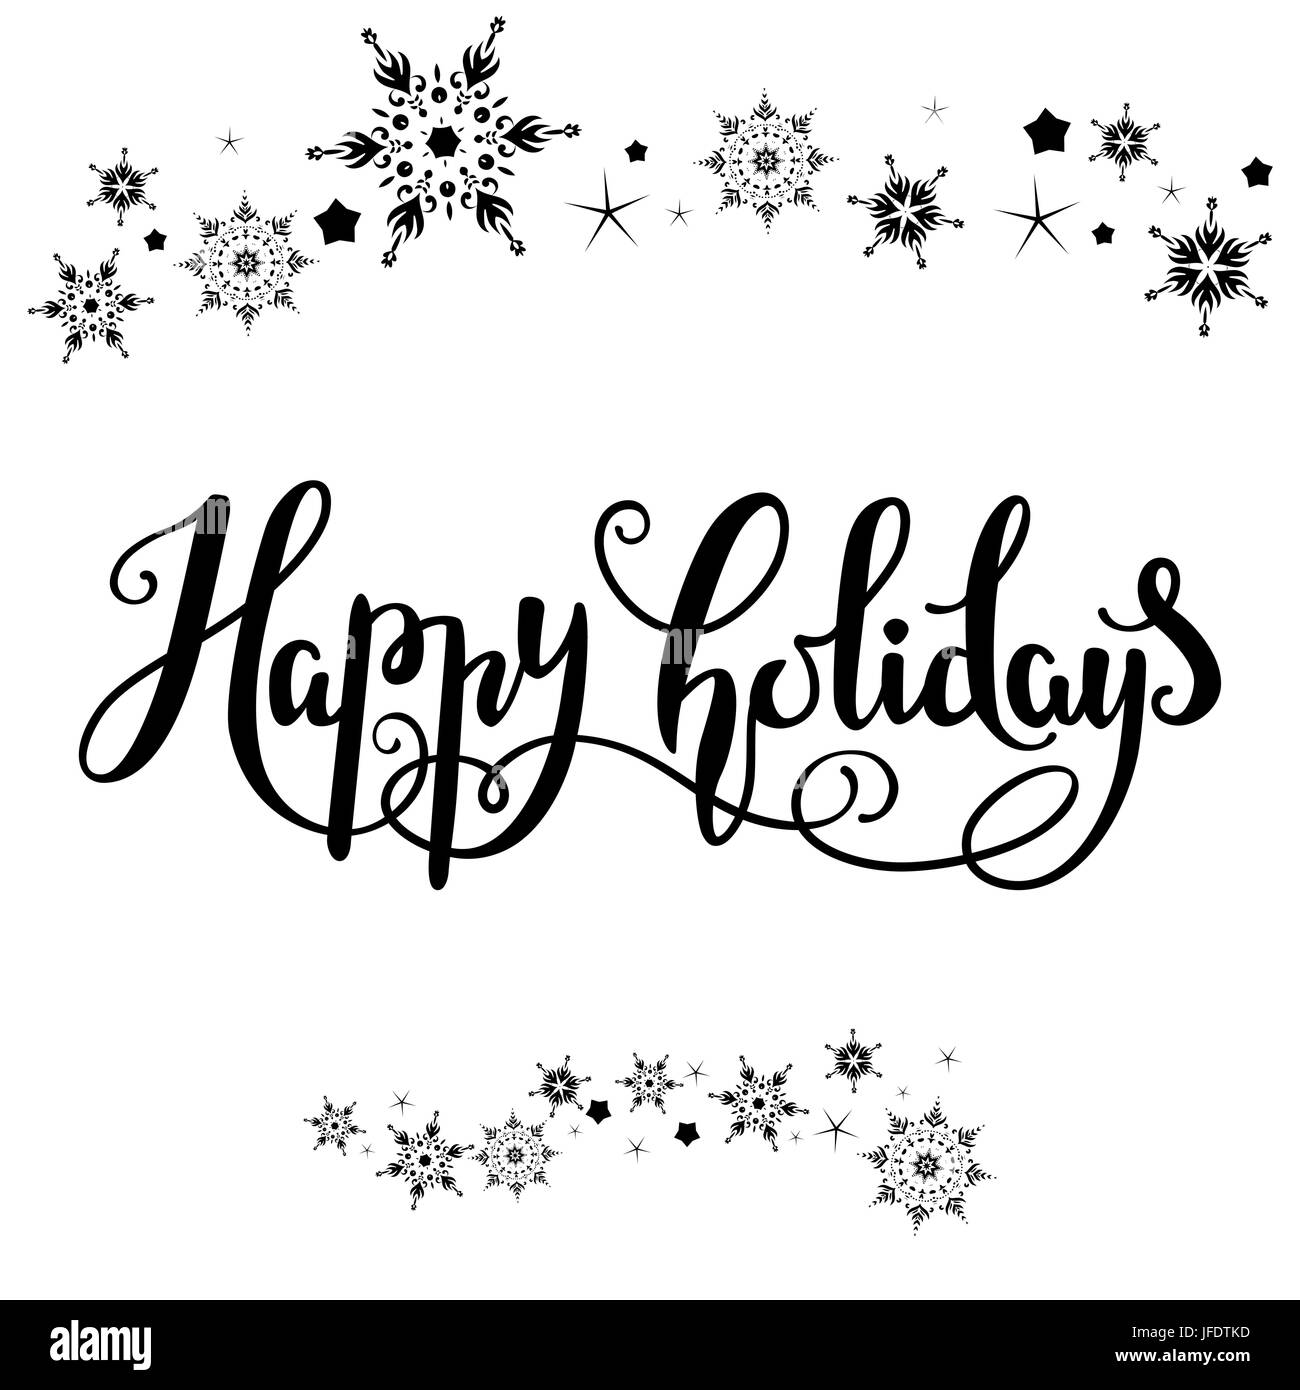 Happy holidays lettering Stock Vector